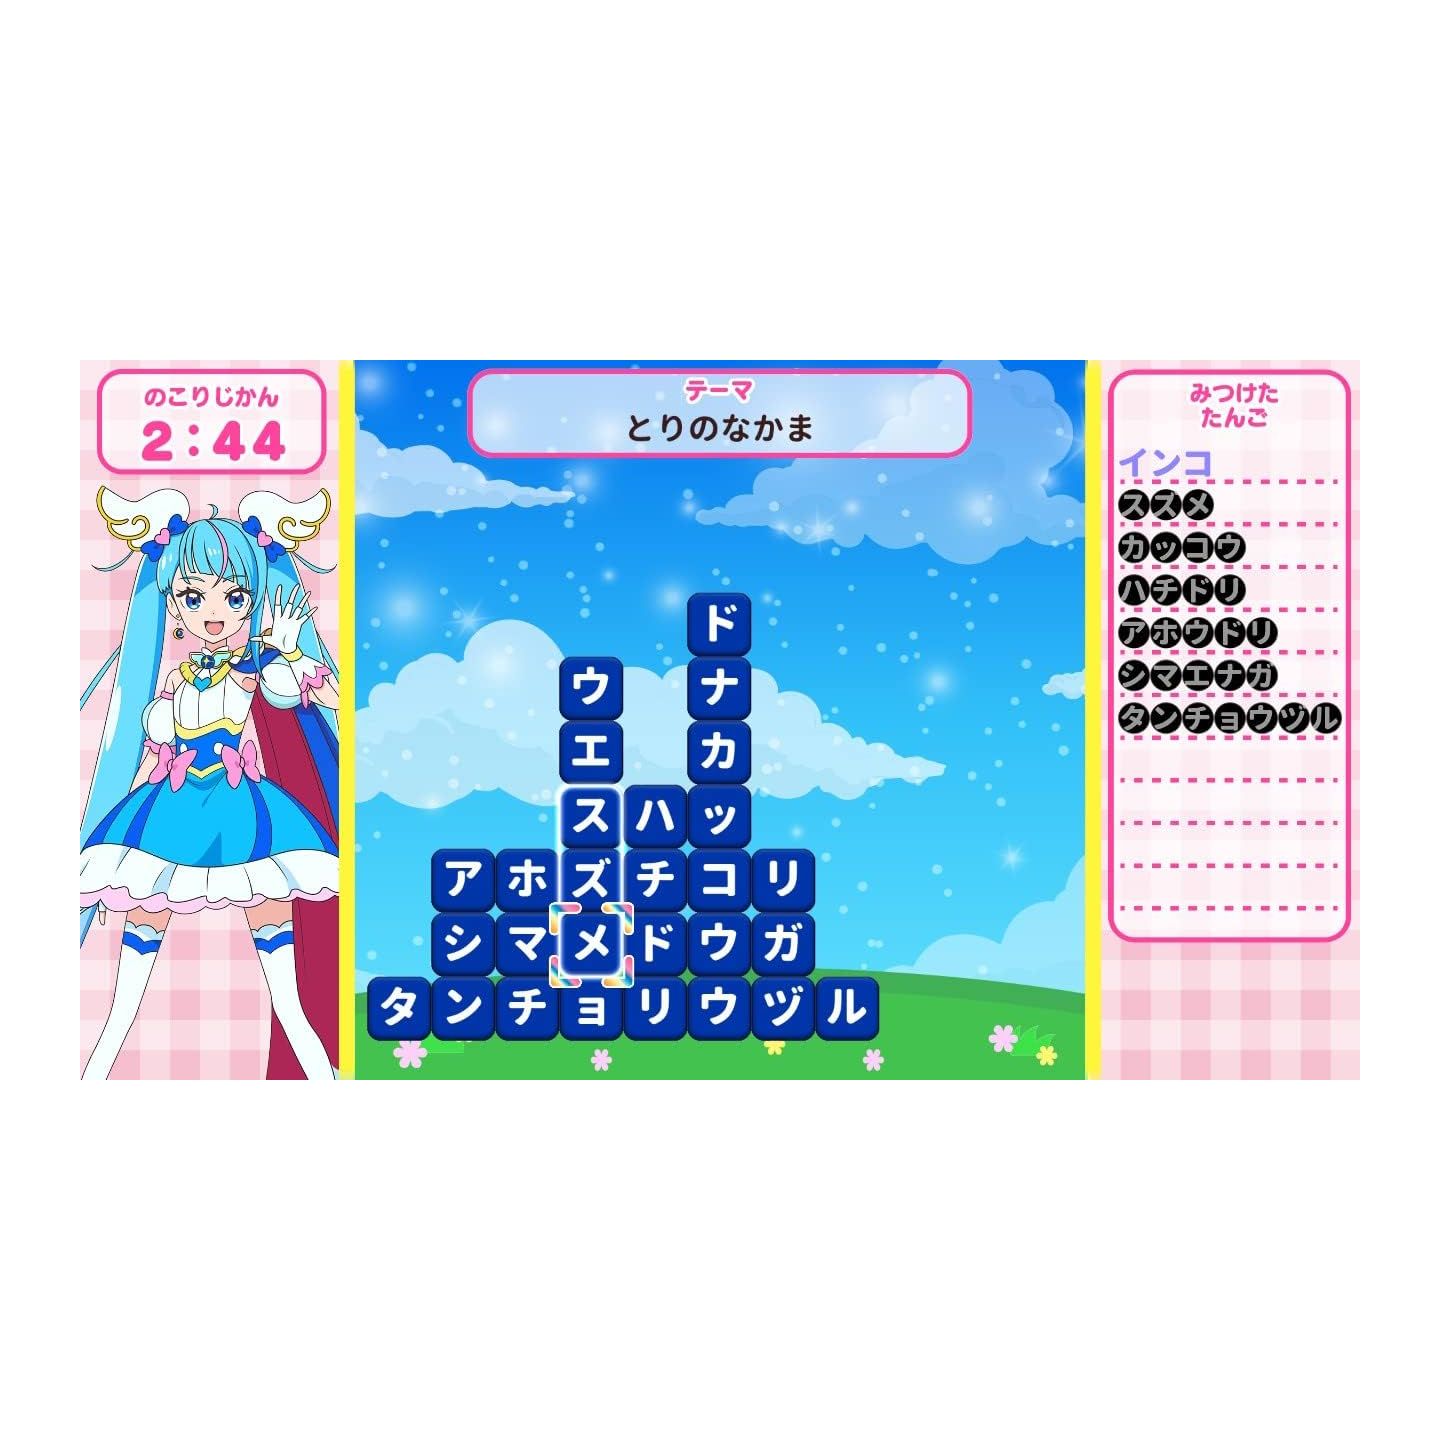 Soaring Sky! Pretty Cure Soaring! Puzzle Collection Launches for Nintendo  Switch in Japan - QooApp News